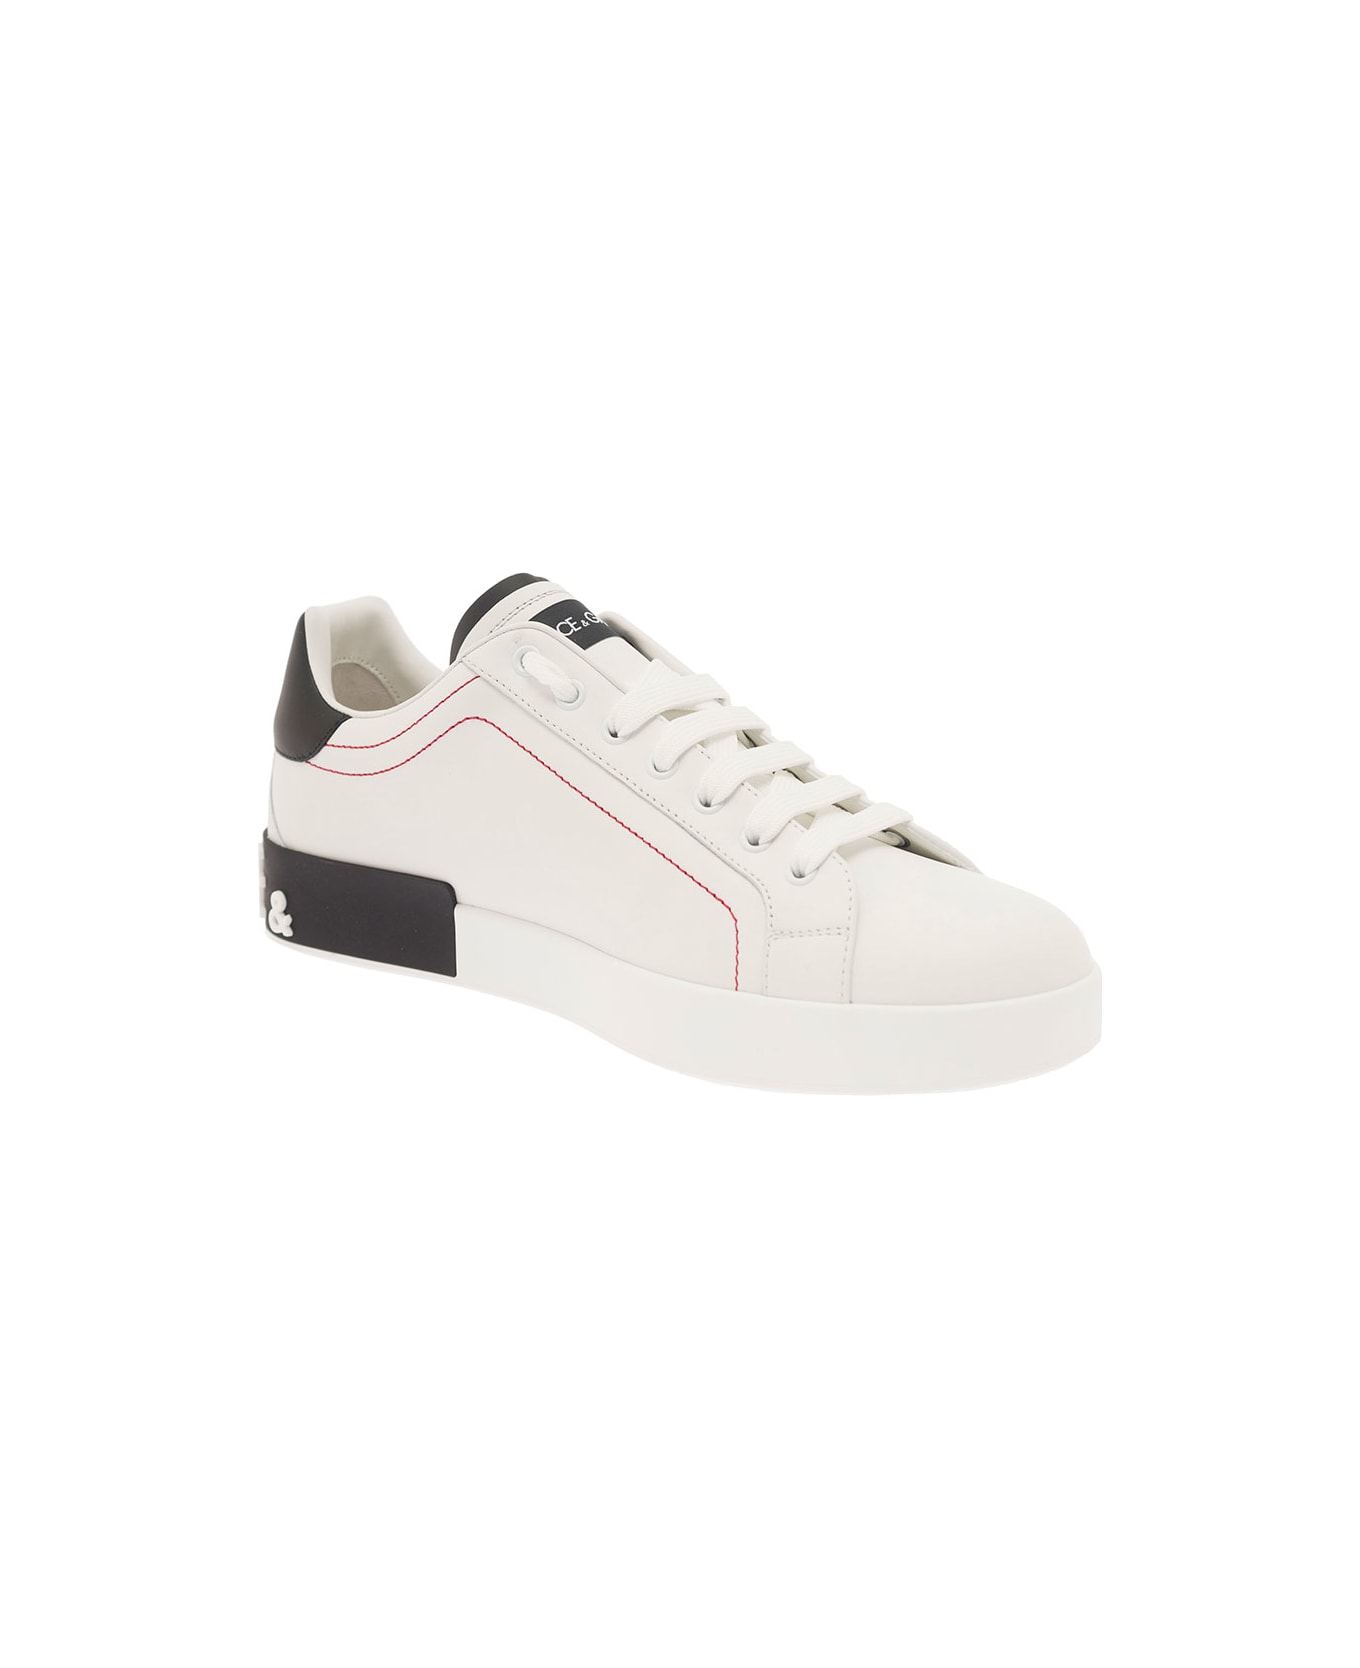 Dolce & Gabbana 'portofino' White Low Top Sneakers With Patch Logo And Red Stitching In Smooth Leather Man - White